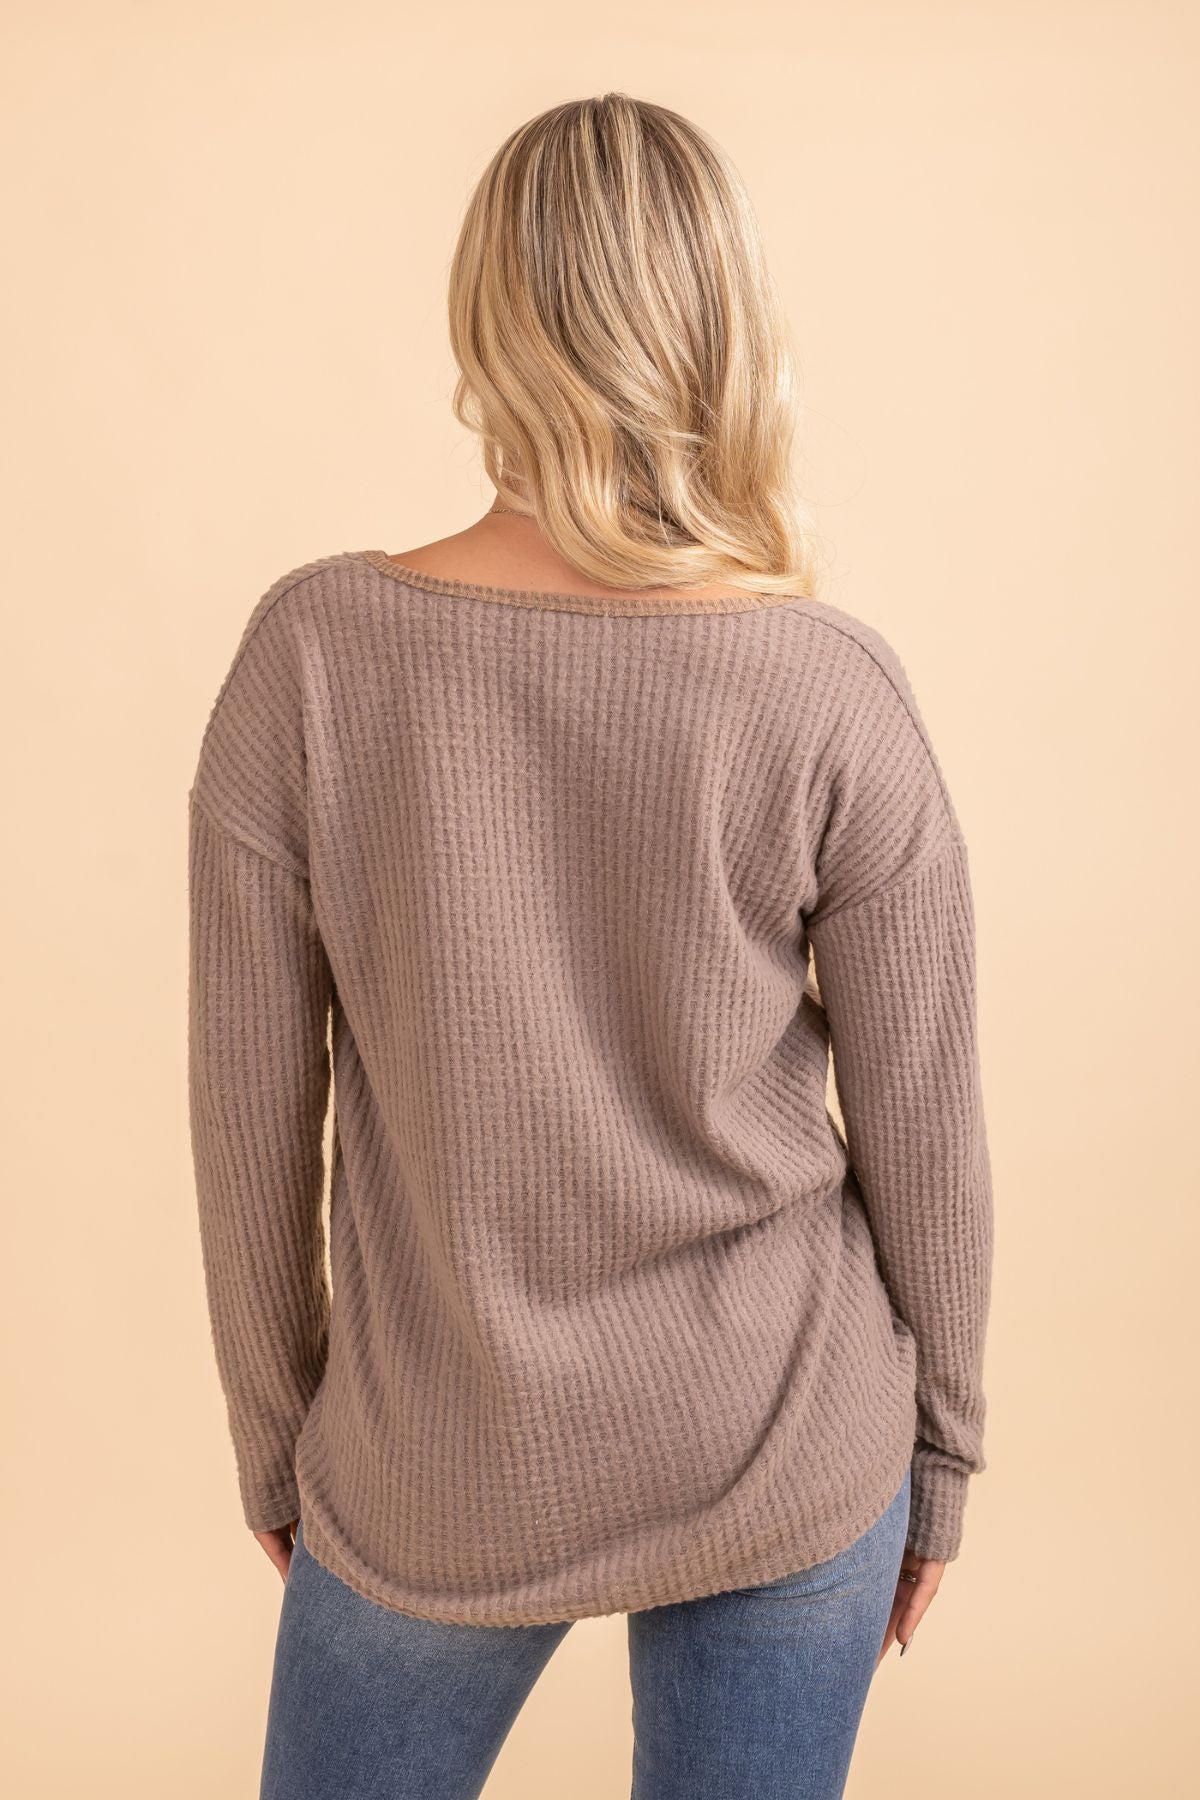 Brown v neck waffle knit long sleeve